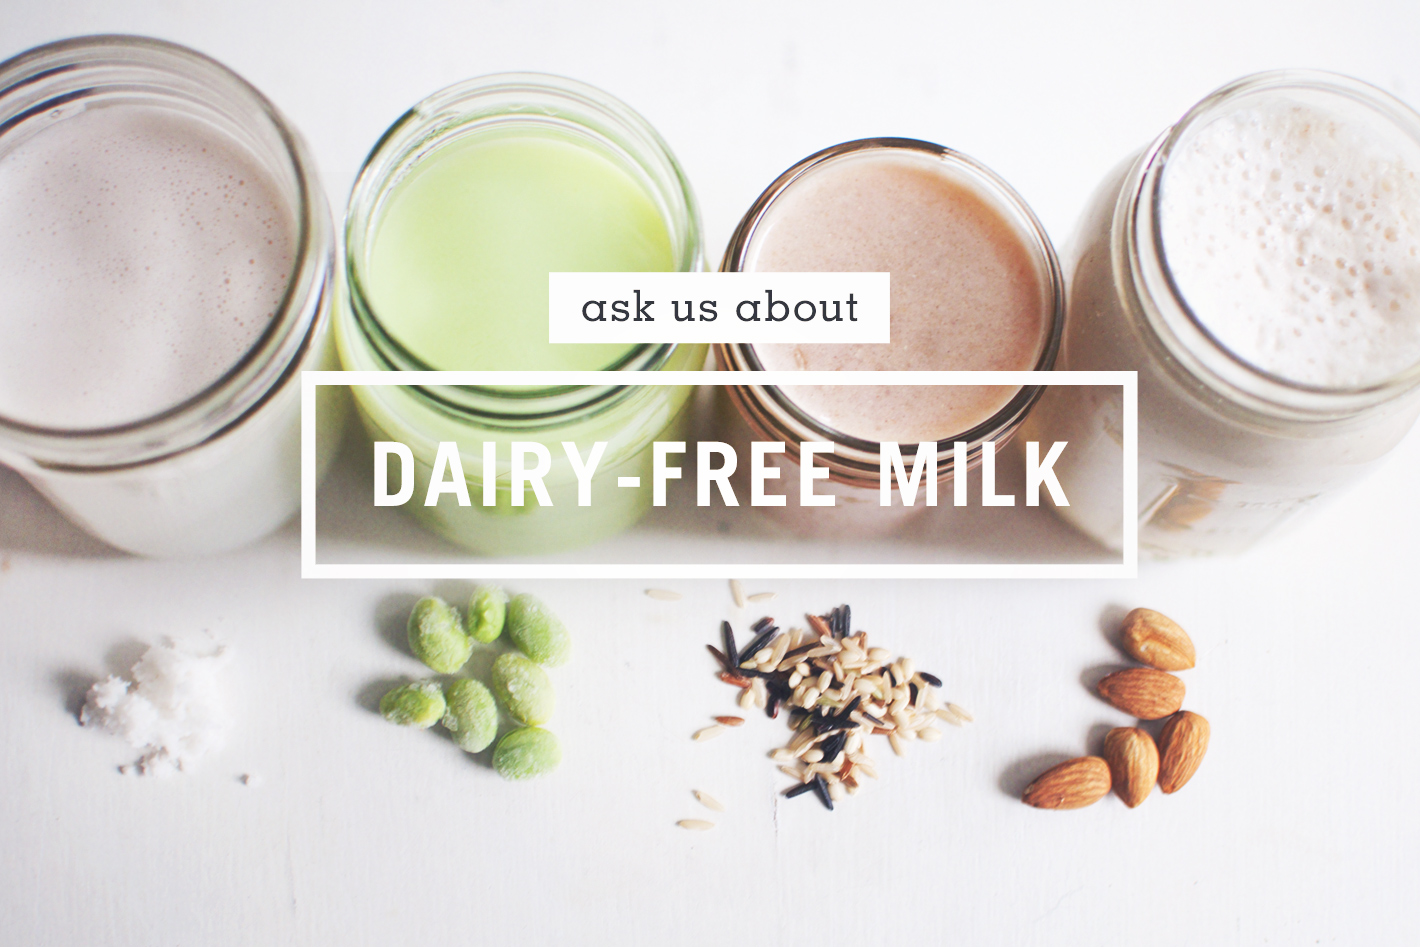 What’s the best dairy-free milk?